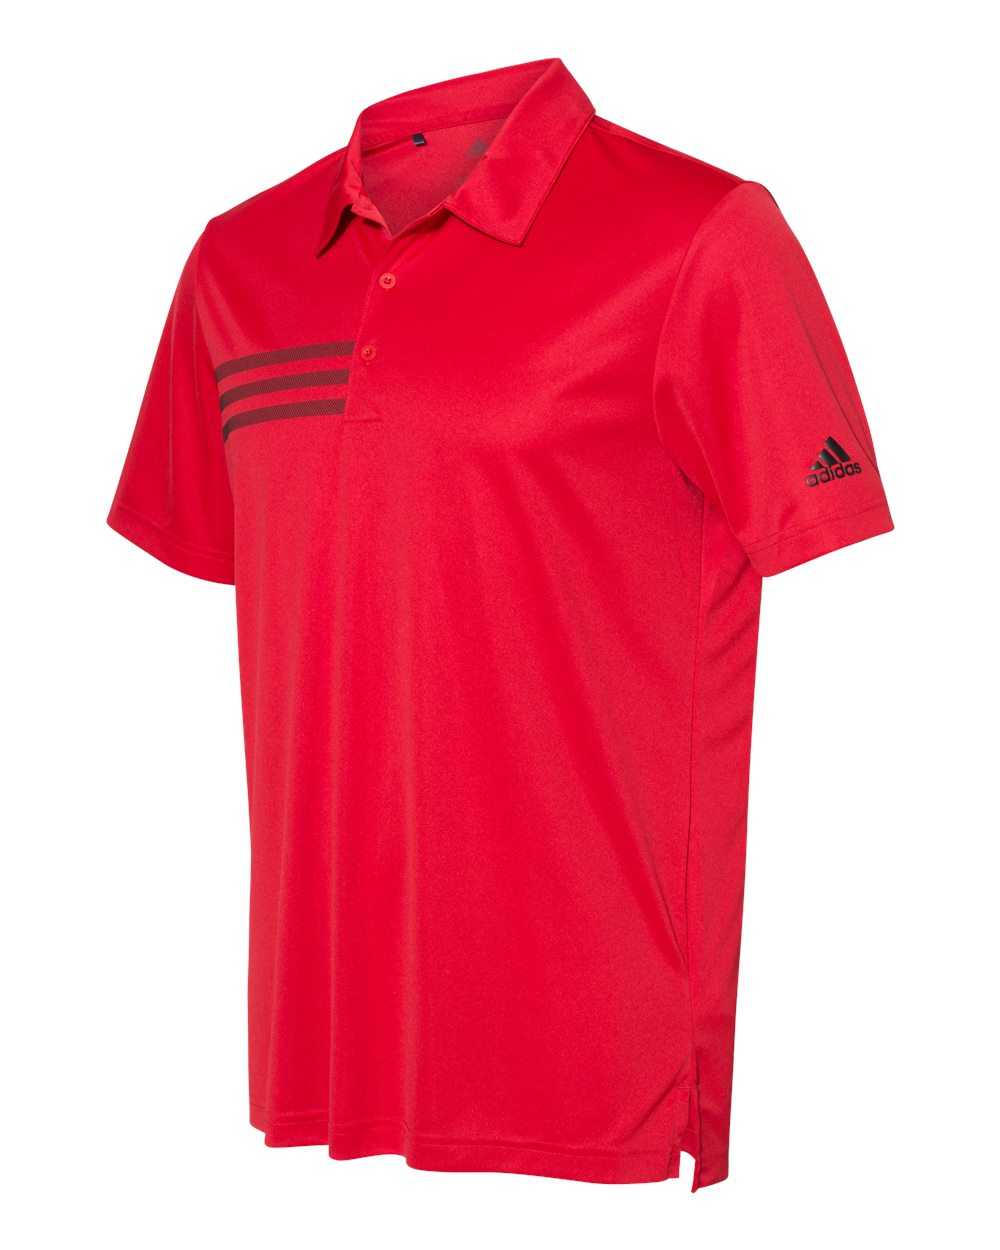 Adidas A324 3-Stripes Chest Sport Shirt - Collegiate Red Black - HIT a Double